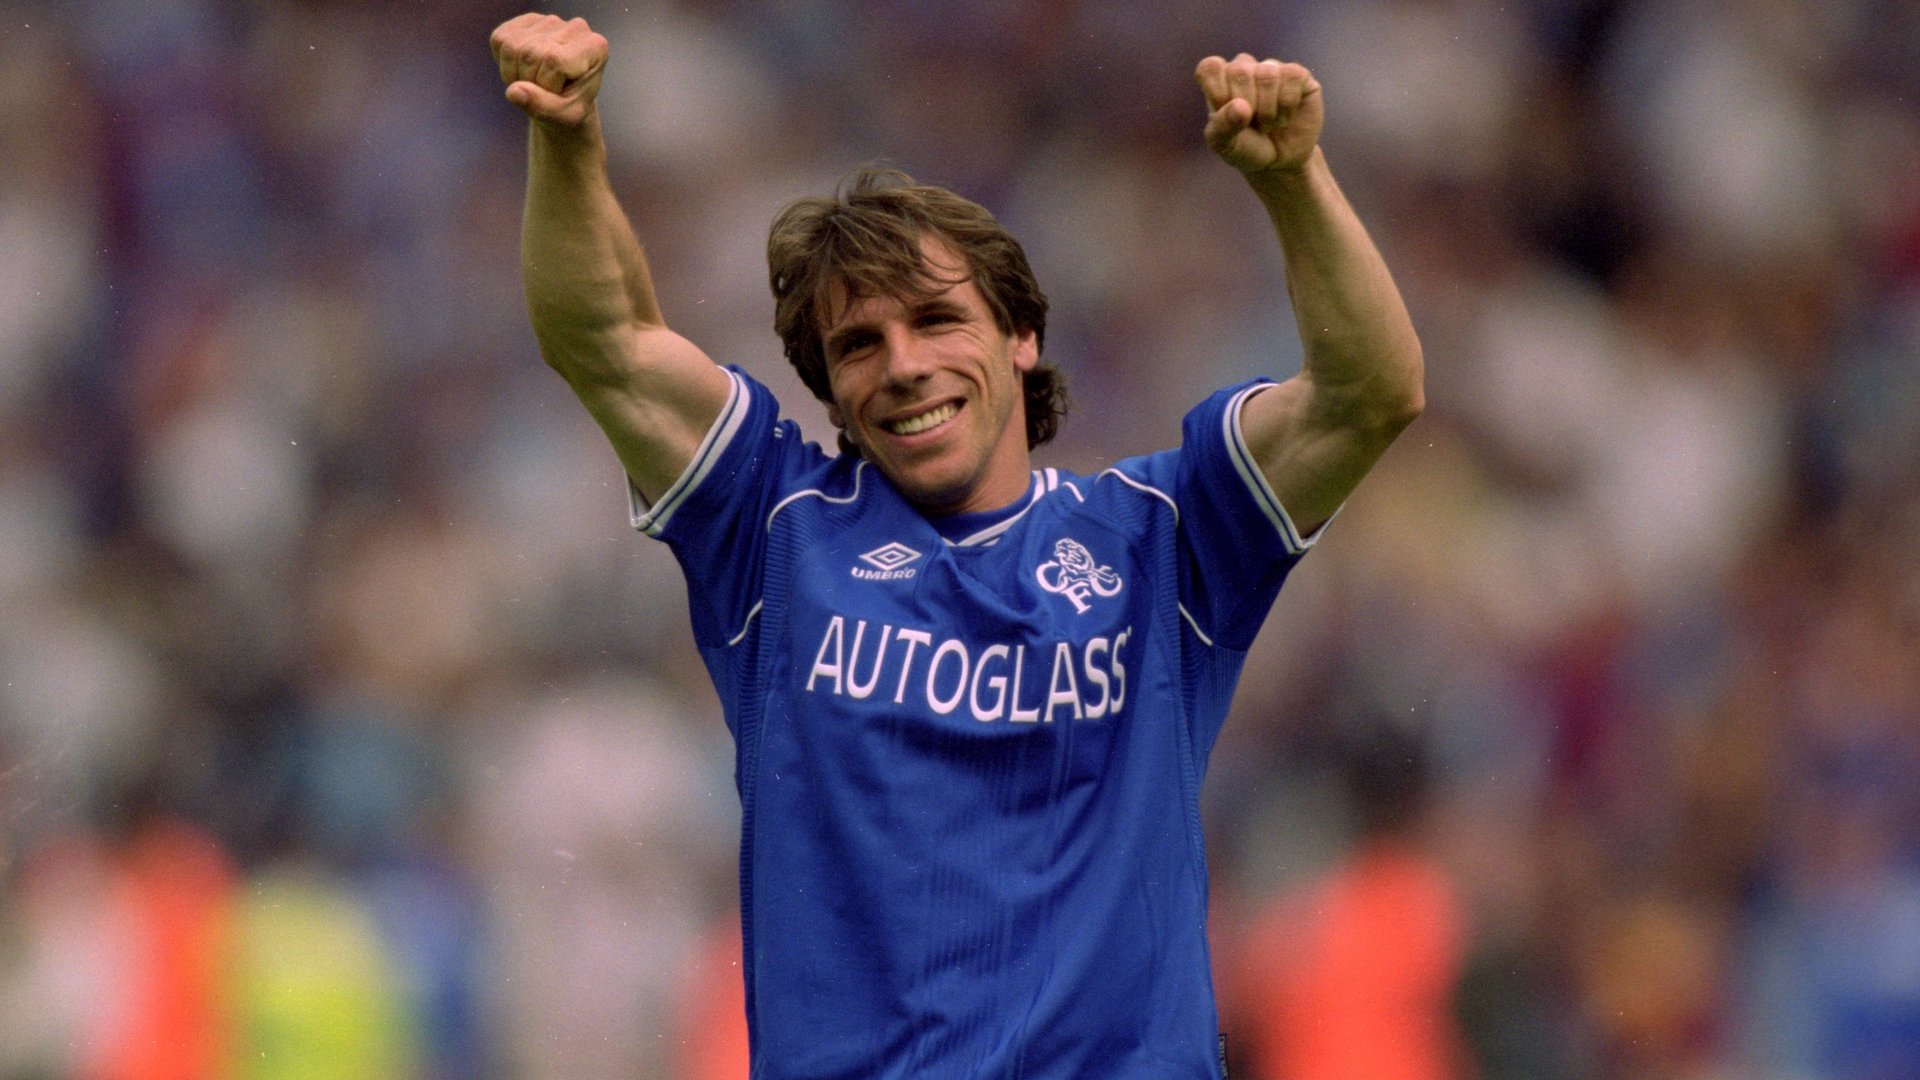 Chelsea manager news: Dennis Wise backs club to appoint Gianfranco Zola